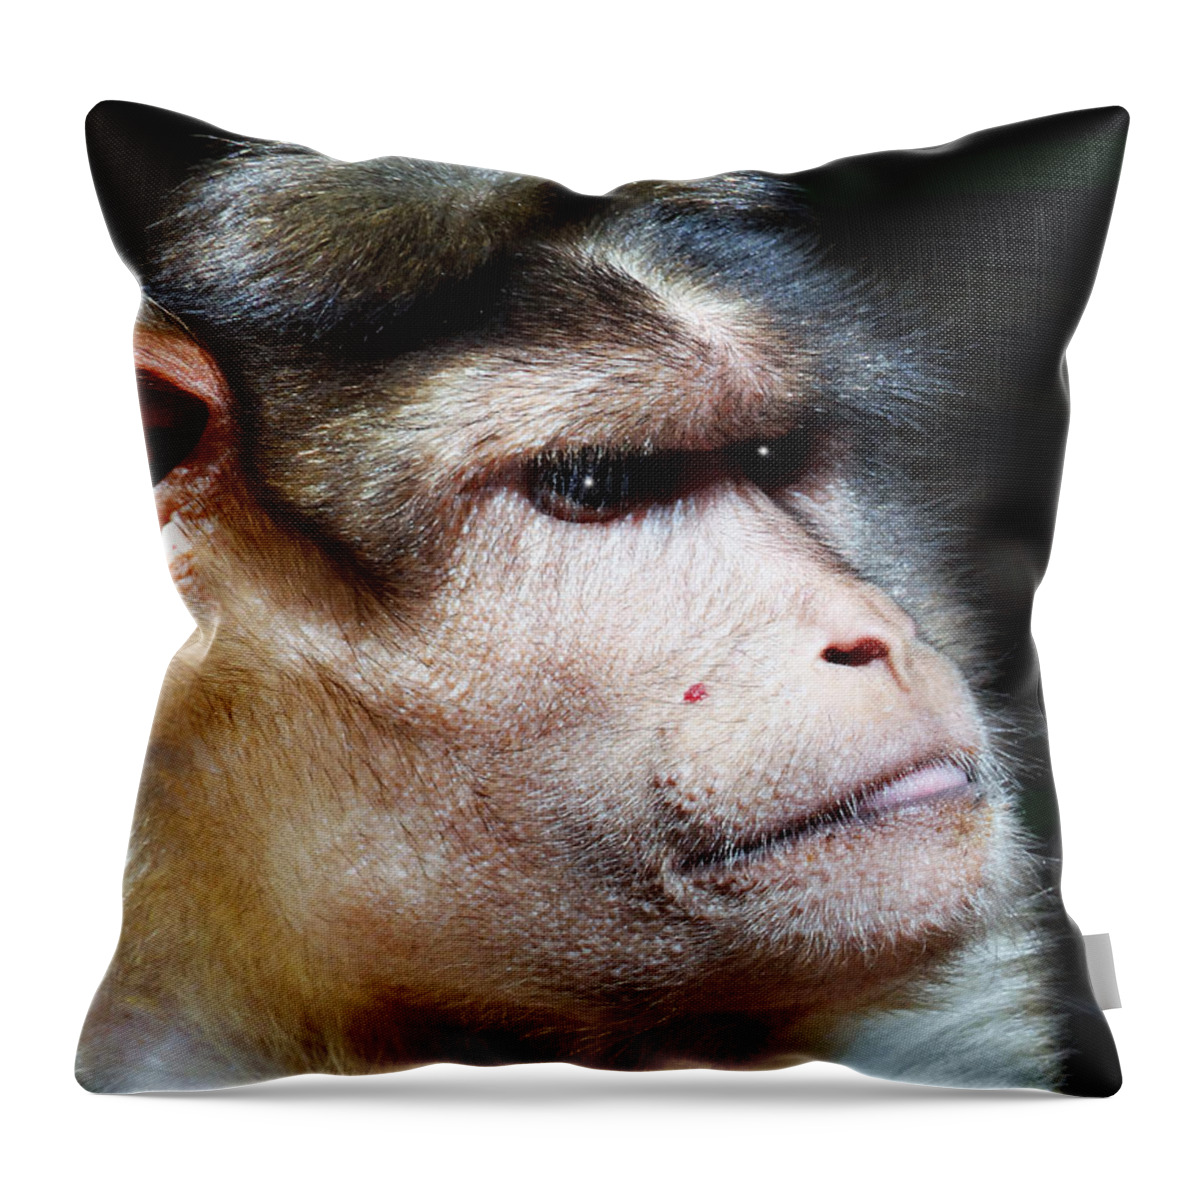 Speechless Throw Pillow featuring the photograph Night Time by Dennis Dugan